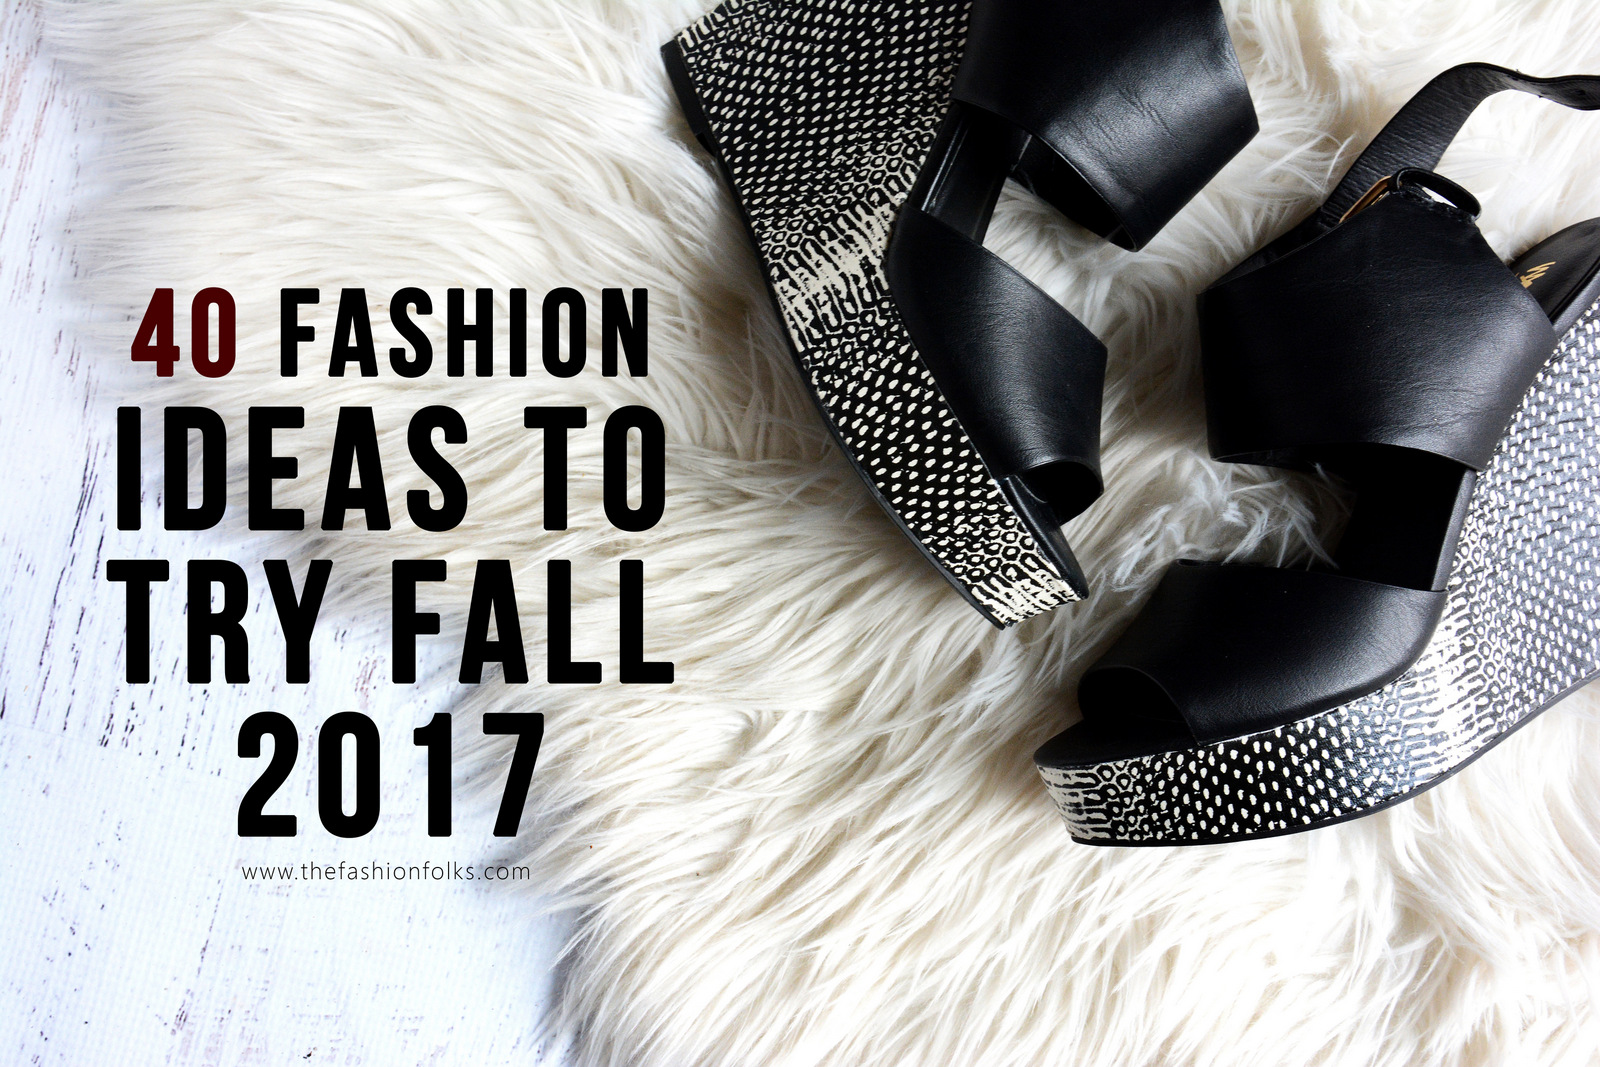 40 Style Ideas To Try For Fall 2017 - The Fashion Folks